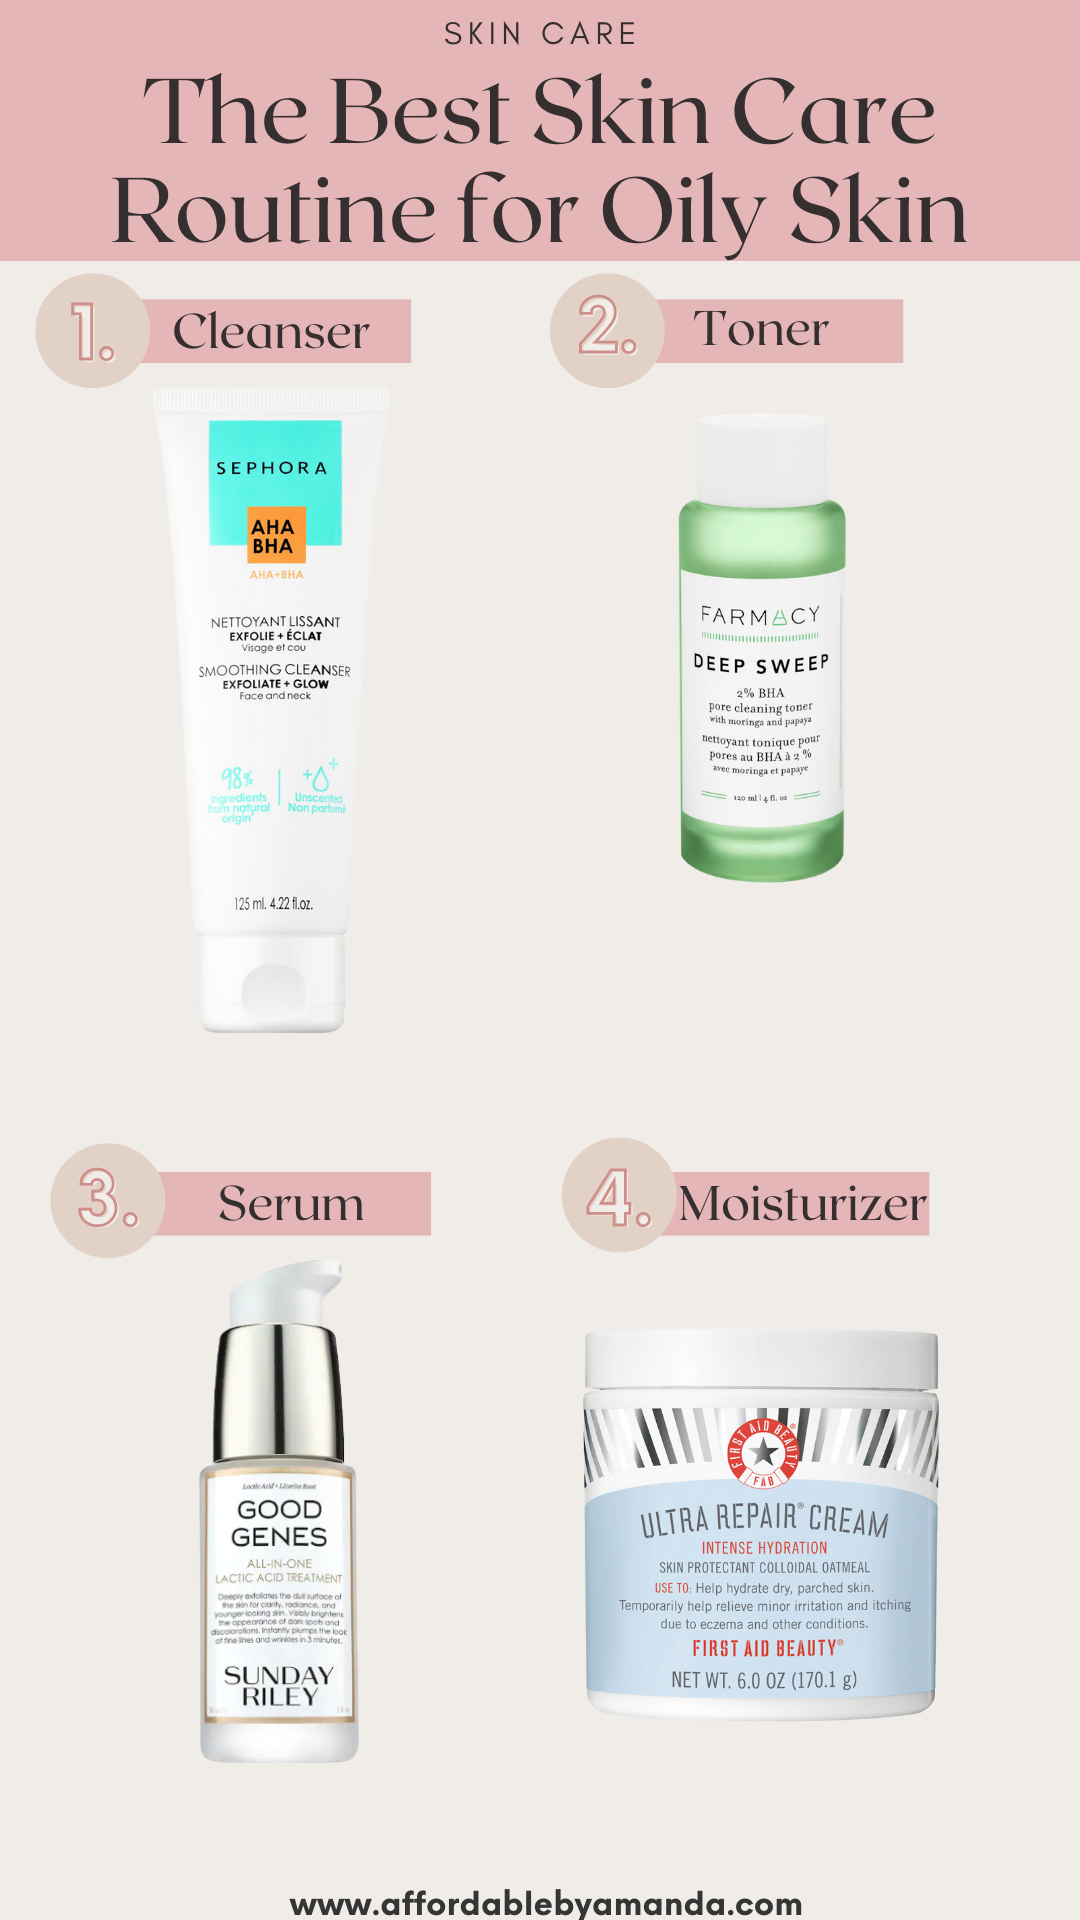 The Best Skin Care Routine For Oily Skin - Affordable by Amanda